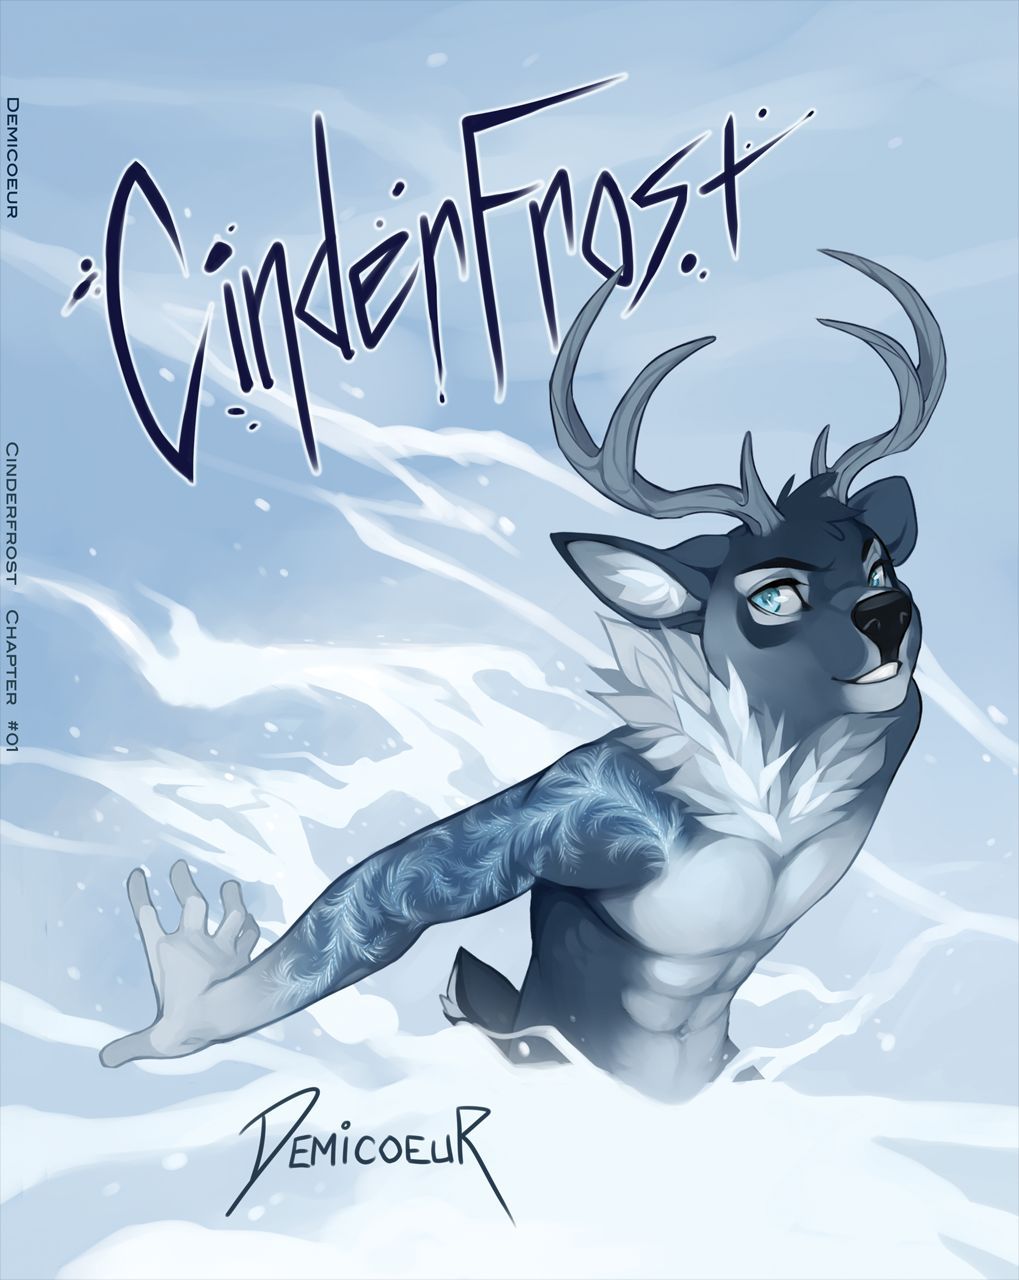 [Demicoeur] CinderFrost HD (Ongoing) 1